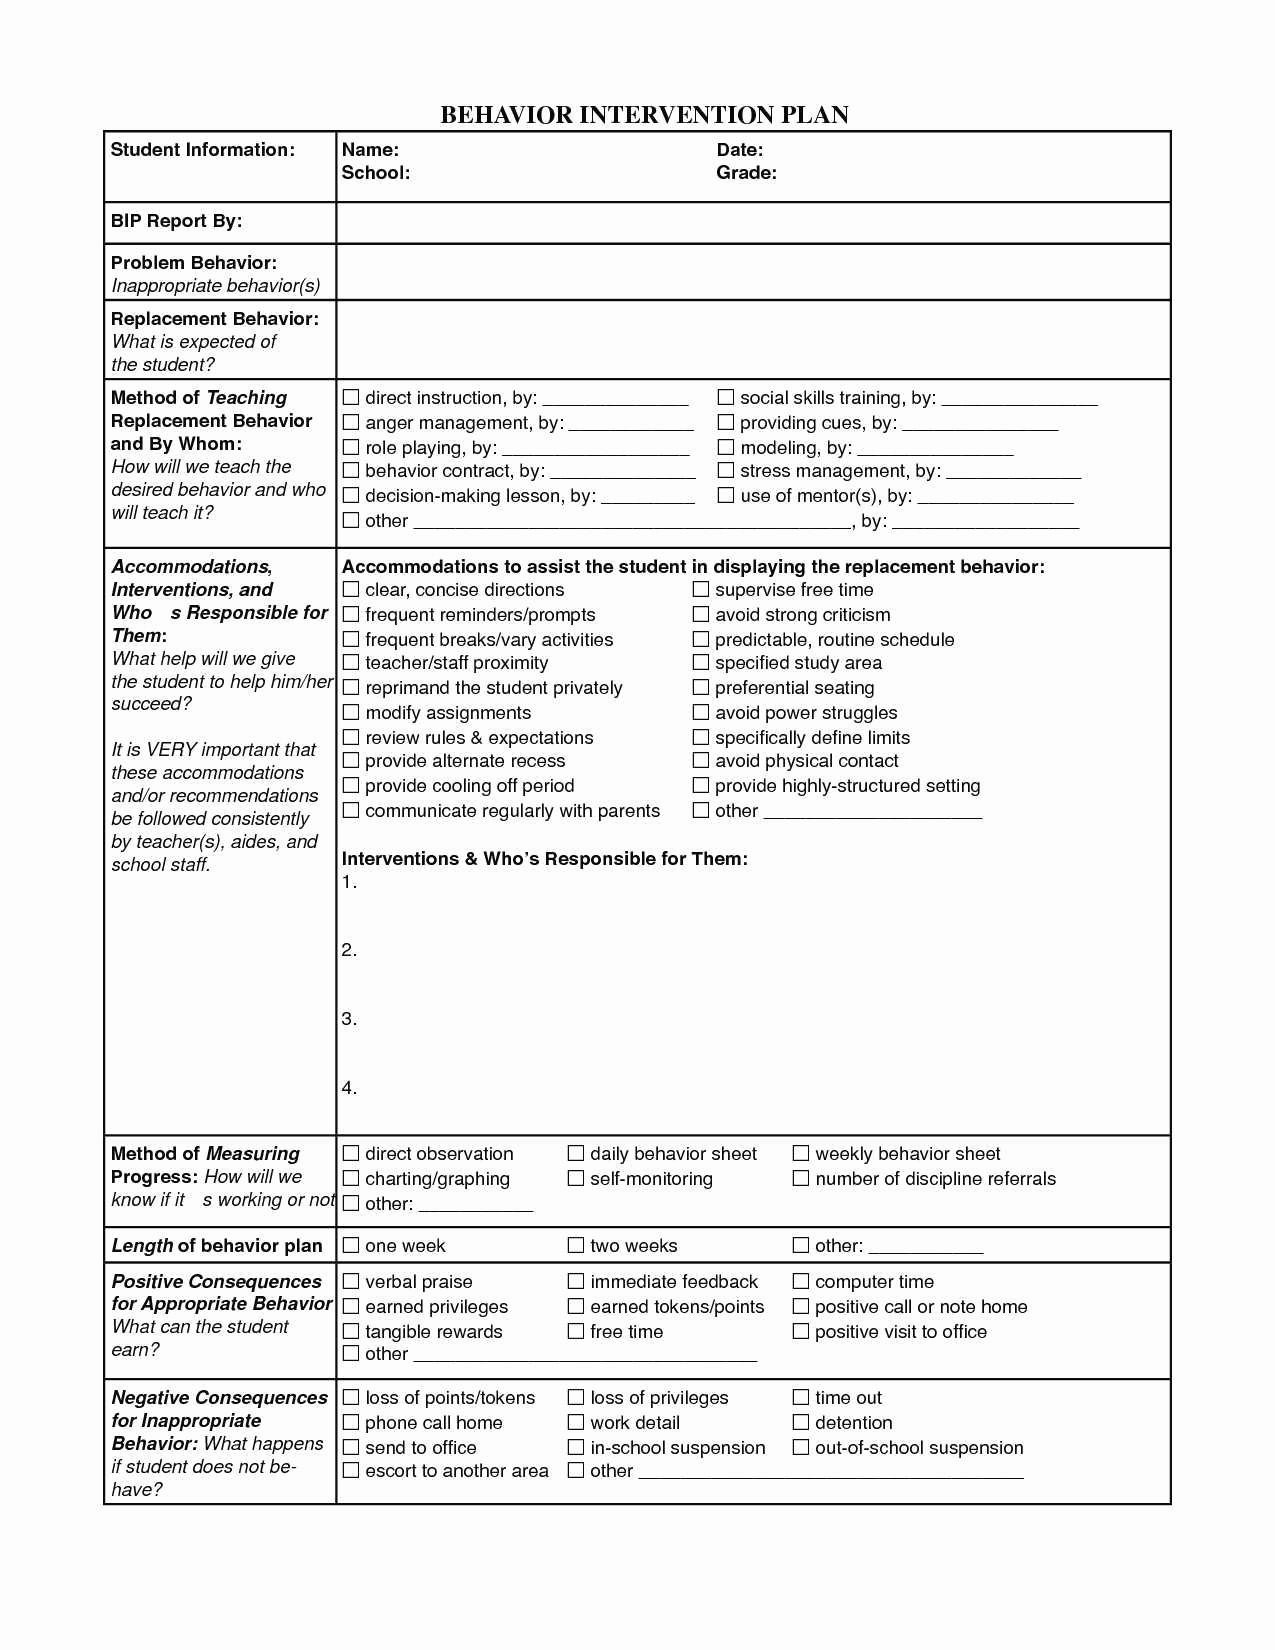 Therapist Treatment Plan Template Awesome Elegant Counseling Treatment Plan Template